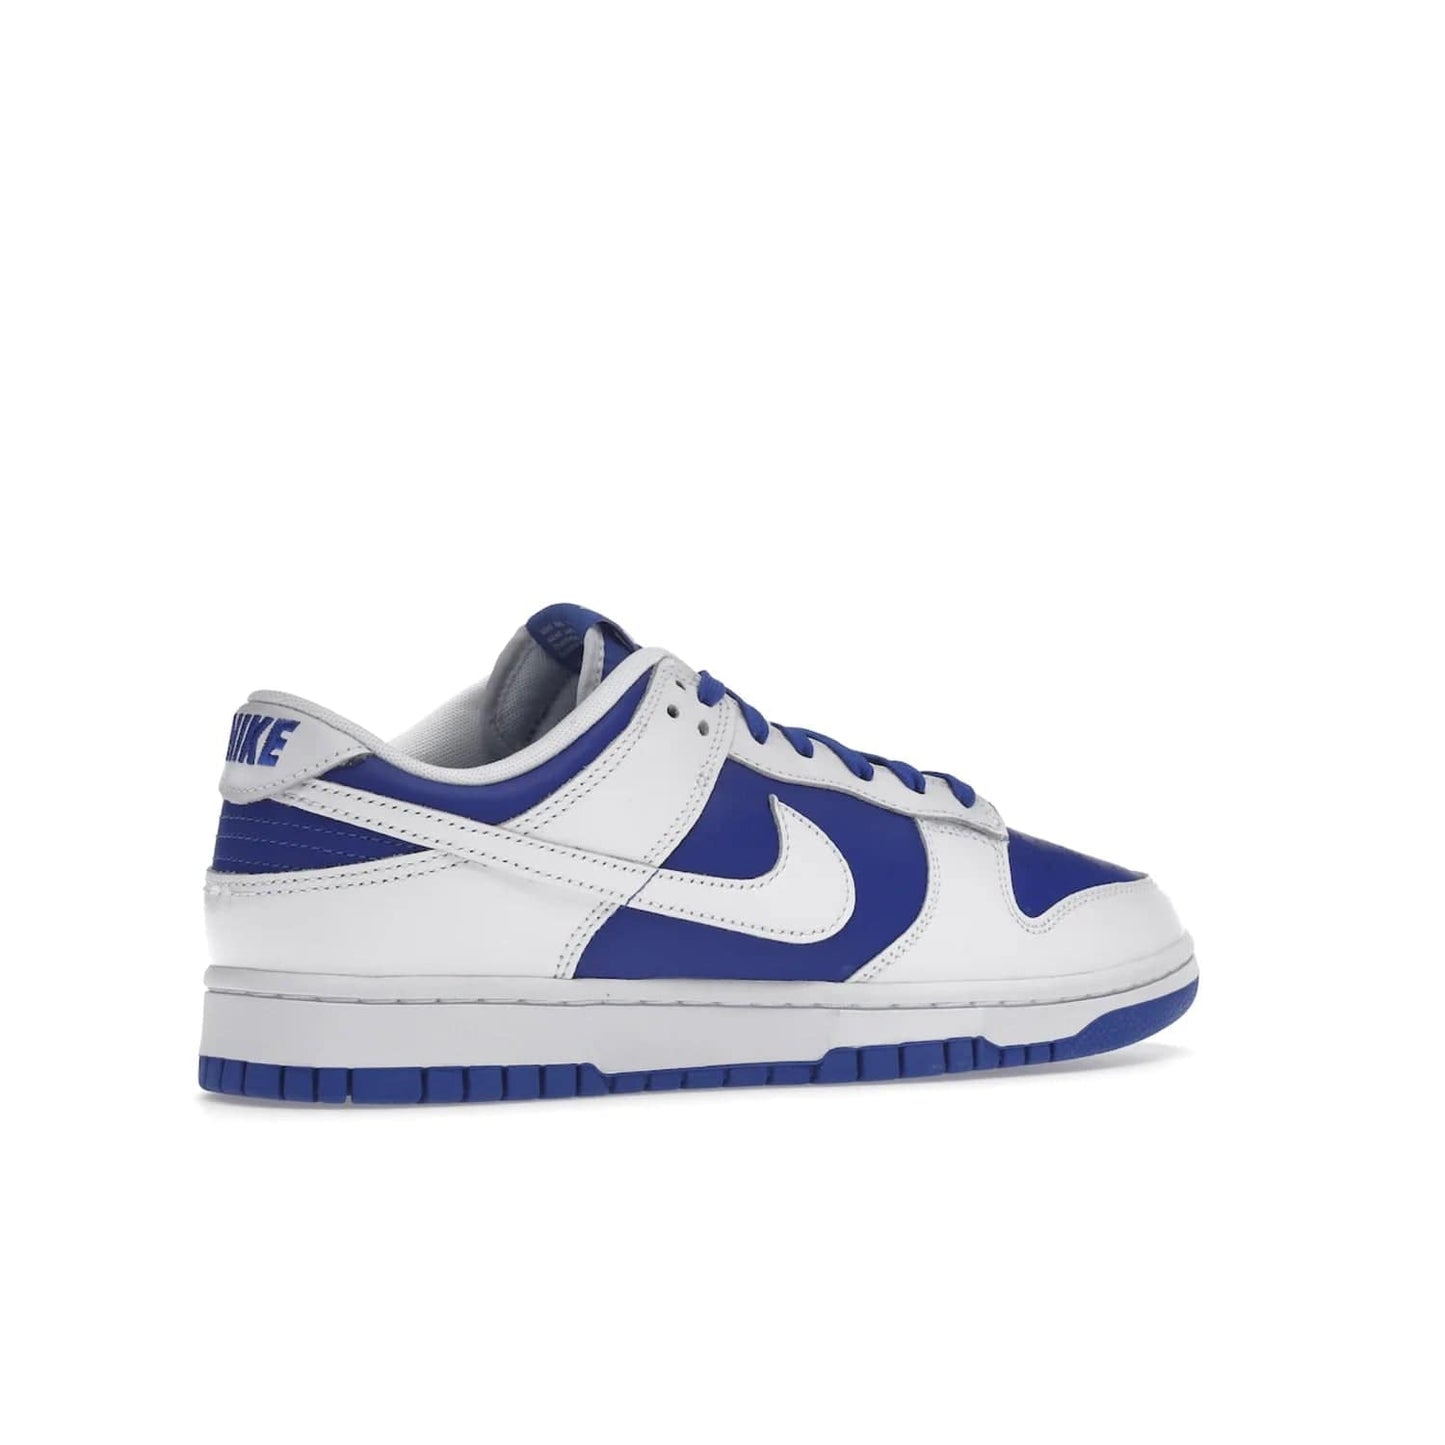 Nike Dunk Low Racer Blue White - Image 34 - Only at www.BallersClubKickz.com - Sleek Racer Blue leather upper and white leather overlays make up the Nike Dunk Low Racer Blue White. Woven tag and heel embroidery for a 1985 Dunk look with a matching EVA foam sole completes the classic colorway.